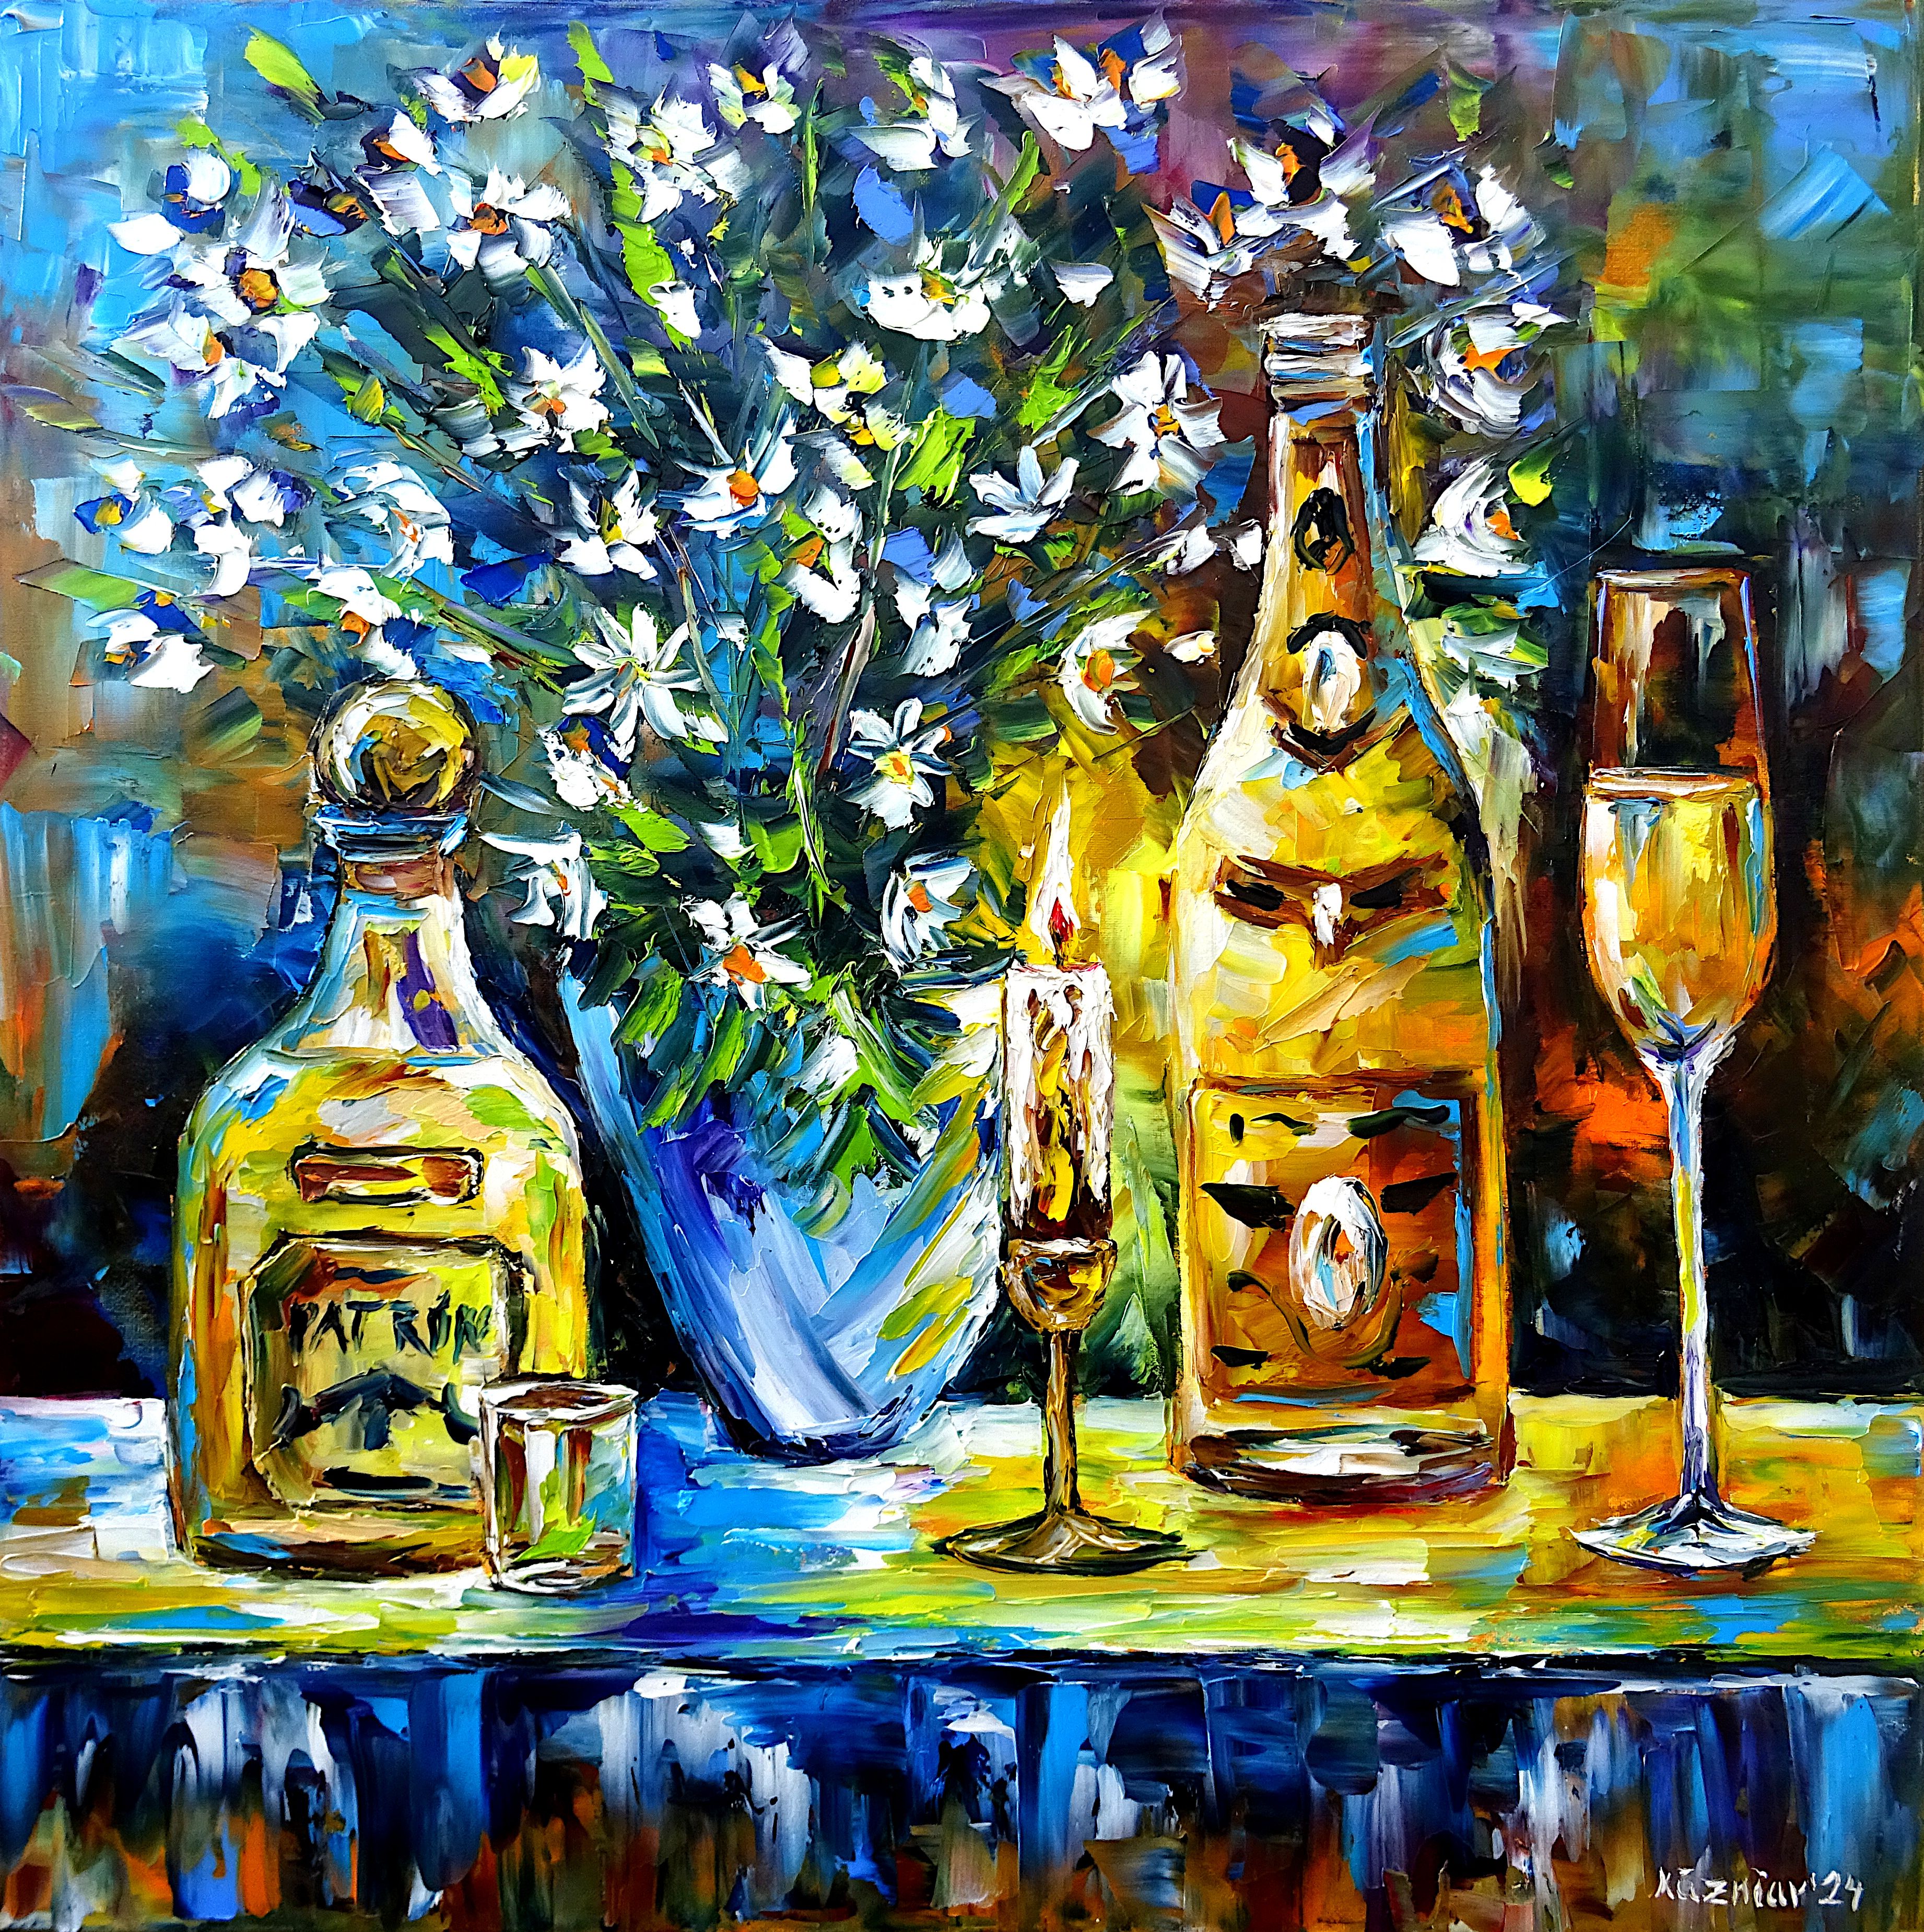 modern still life,spring still life,still life flowers,still life bouquet,field flowers,white flowers,spring flowers,still life with candle,still life with tequila,still life with champagne,tequila and champagne,burning candle,champagne bottle painting,blue yellow white,flowers and bottles,champagne glass,still life abstract,still life expressive,still life square format,still life square painting,still life painting,dining room picture,flowers in vase,square format,square picture,square painting,palette knife oil painting,expressive art,expressive painting,expressionism,lively colors,colorful painting,impasto painting,figurative